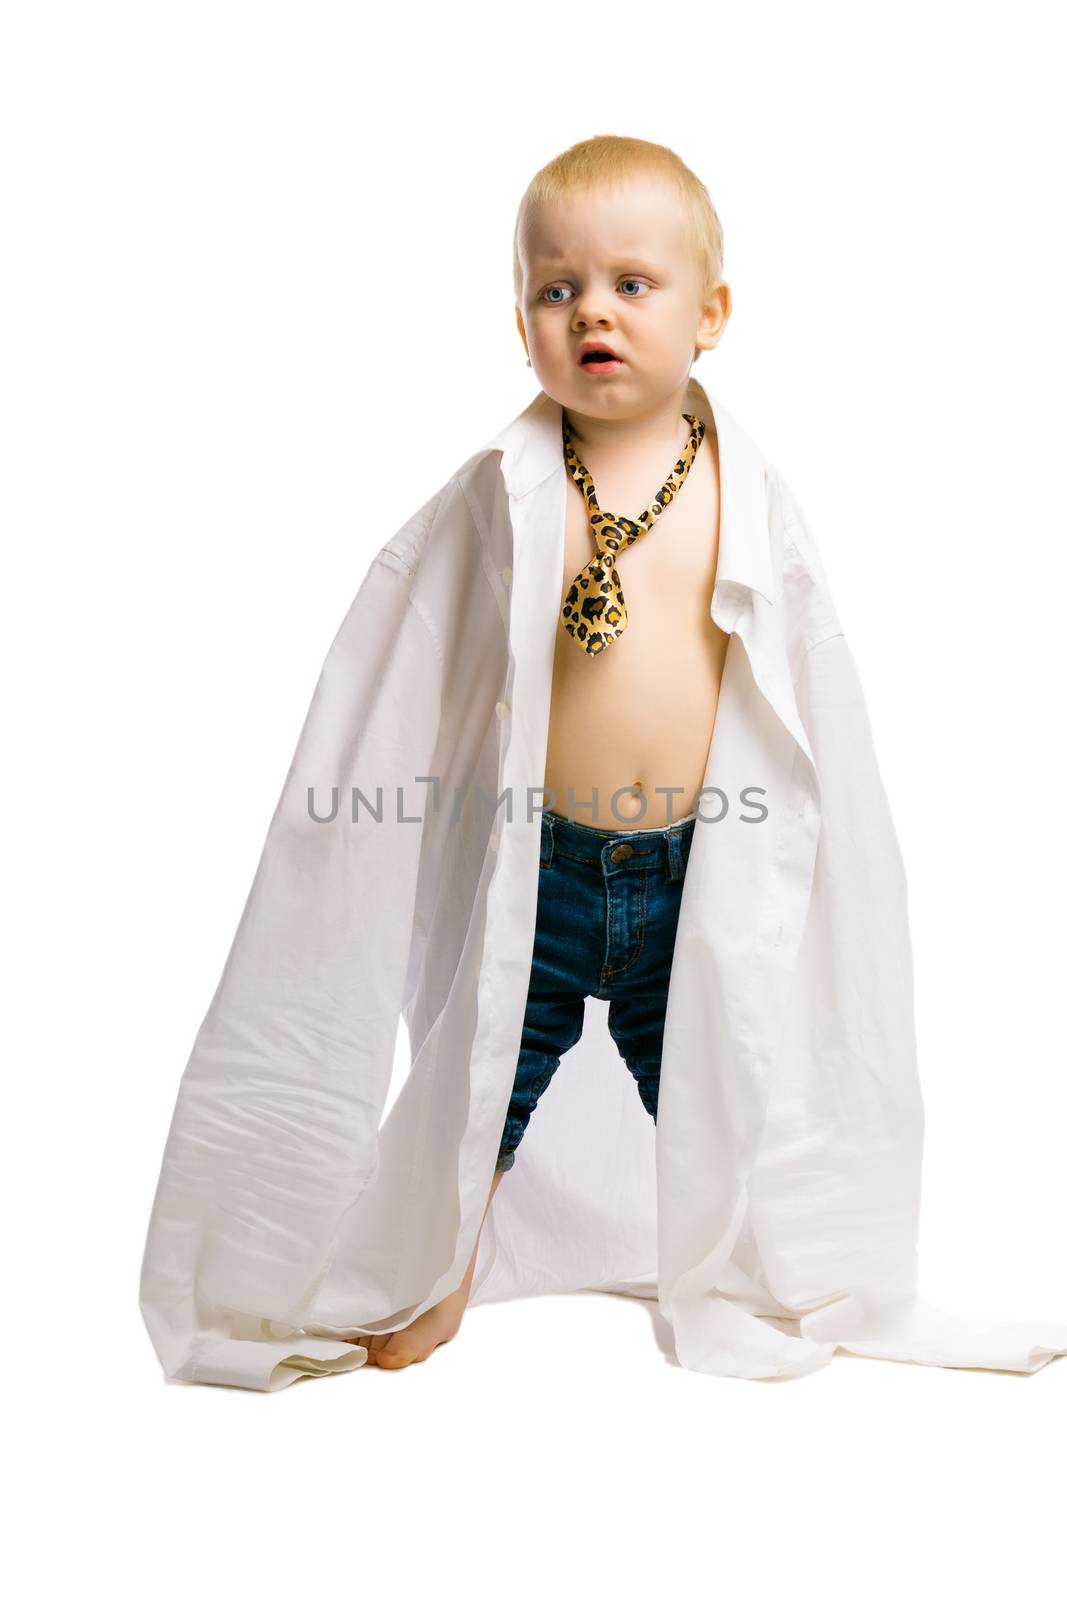 baby boy in a huge shirt and tie. Studio by pzRomashka